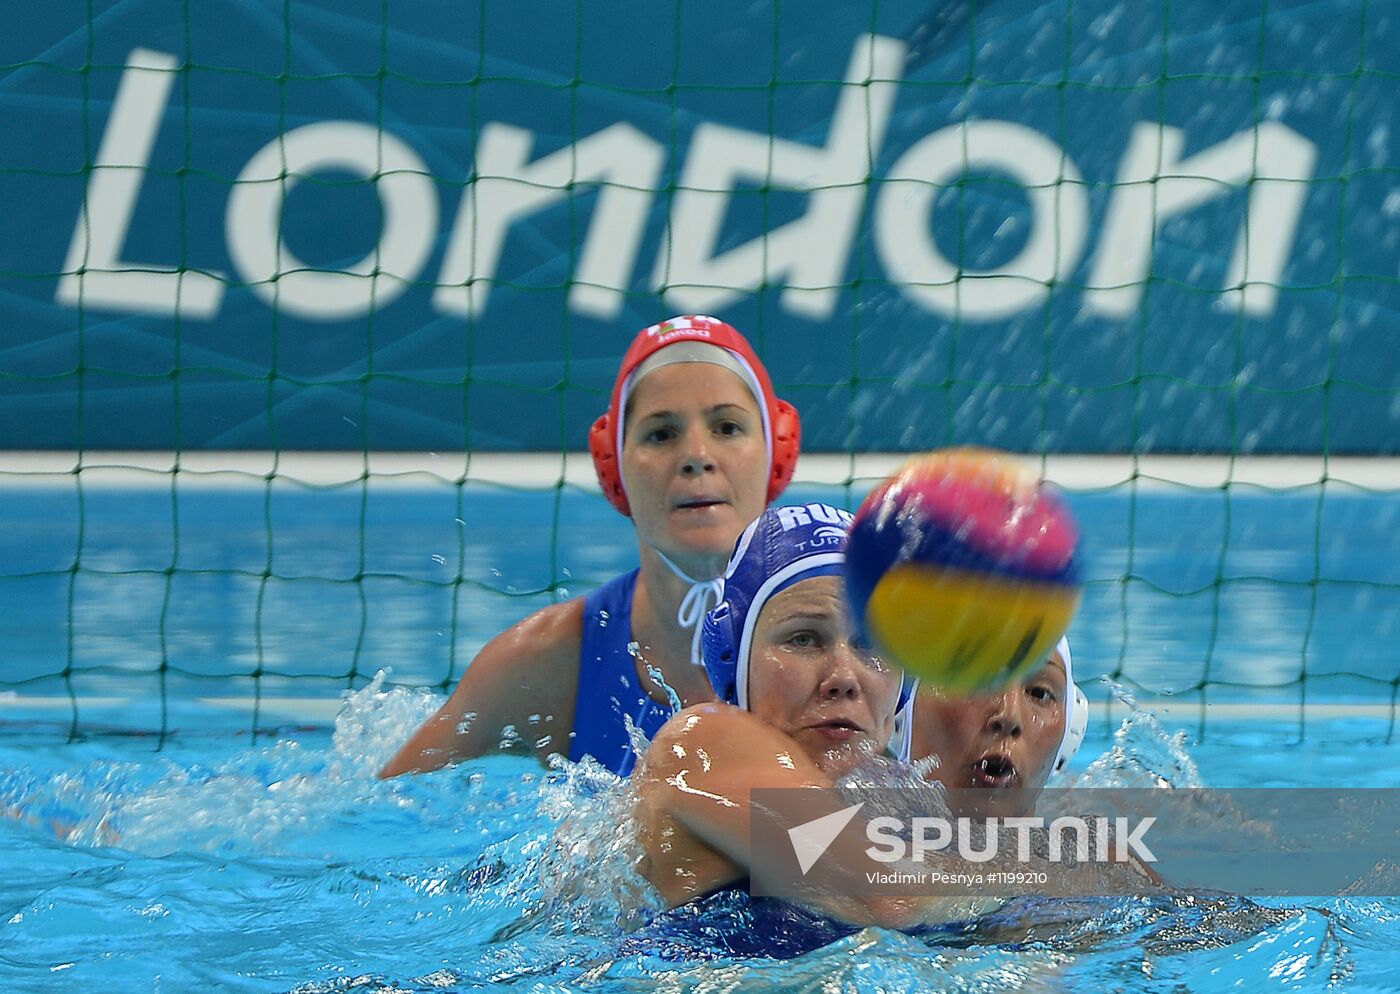 2012 Olympic Games. Women's Water Polo. Italy vs. Russia